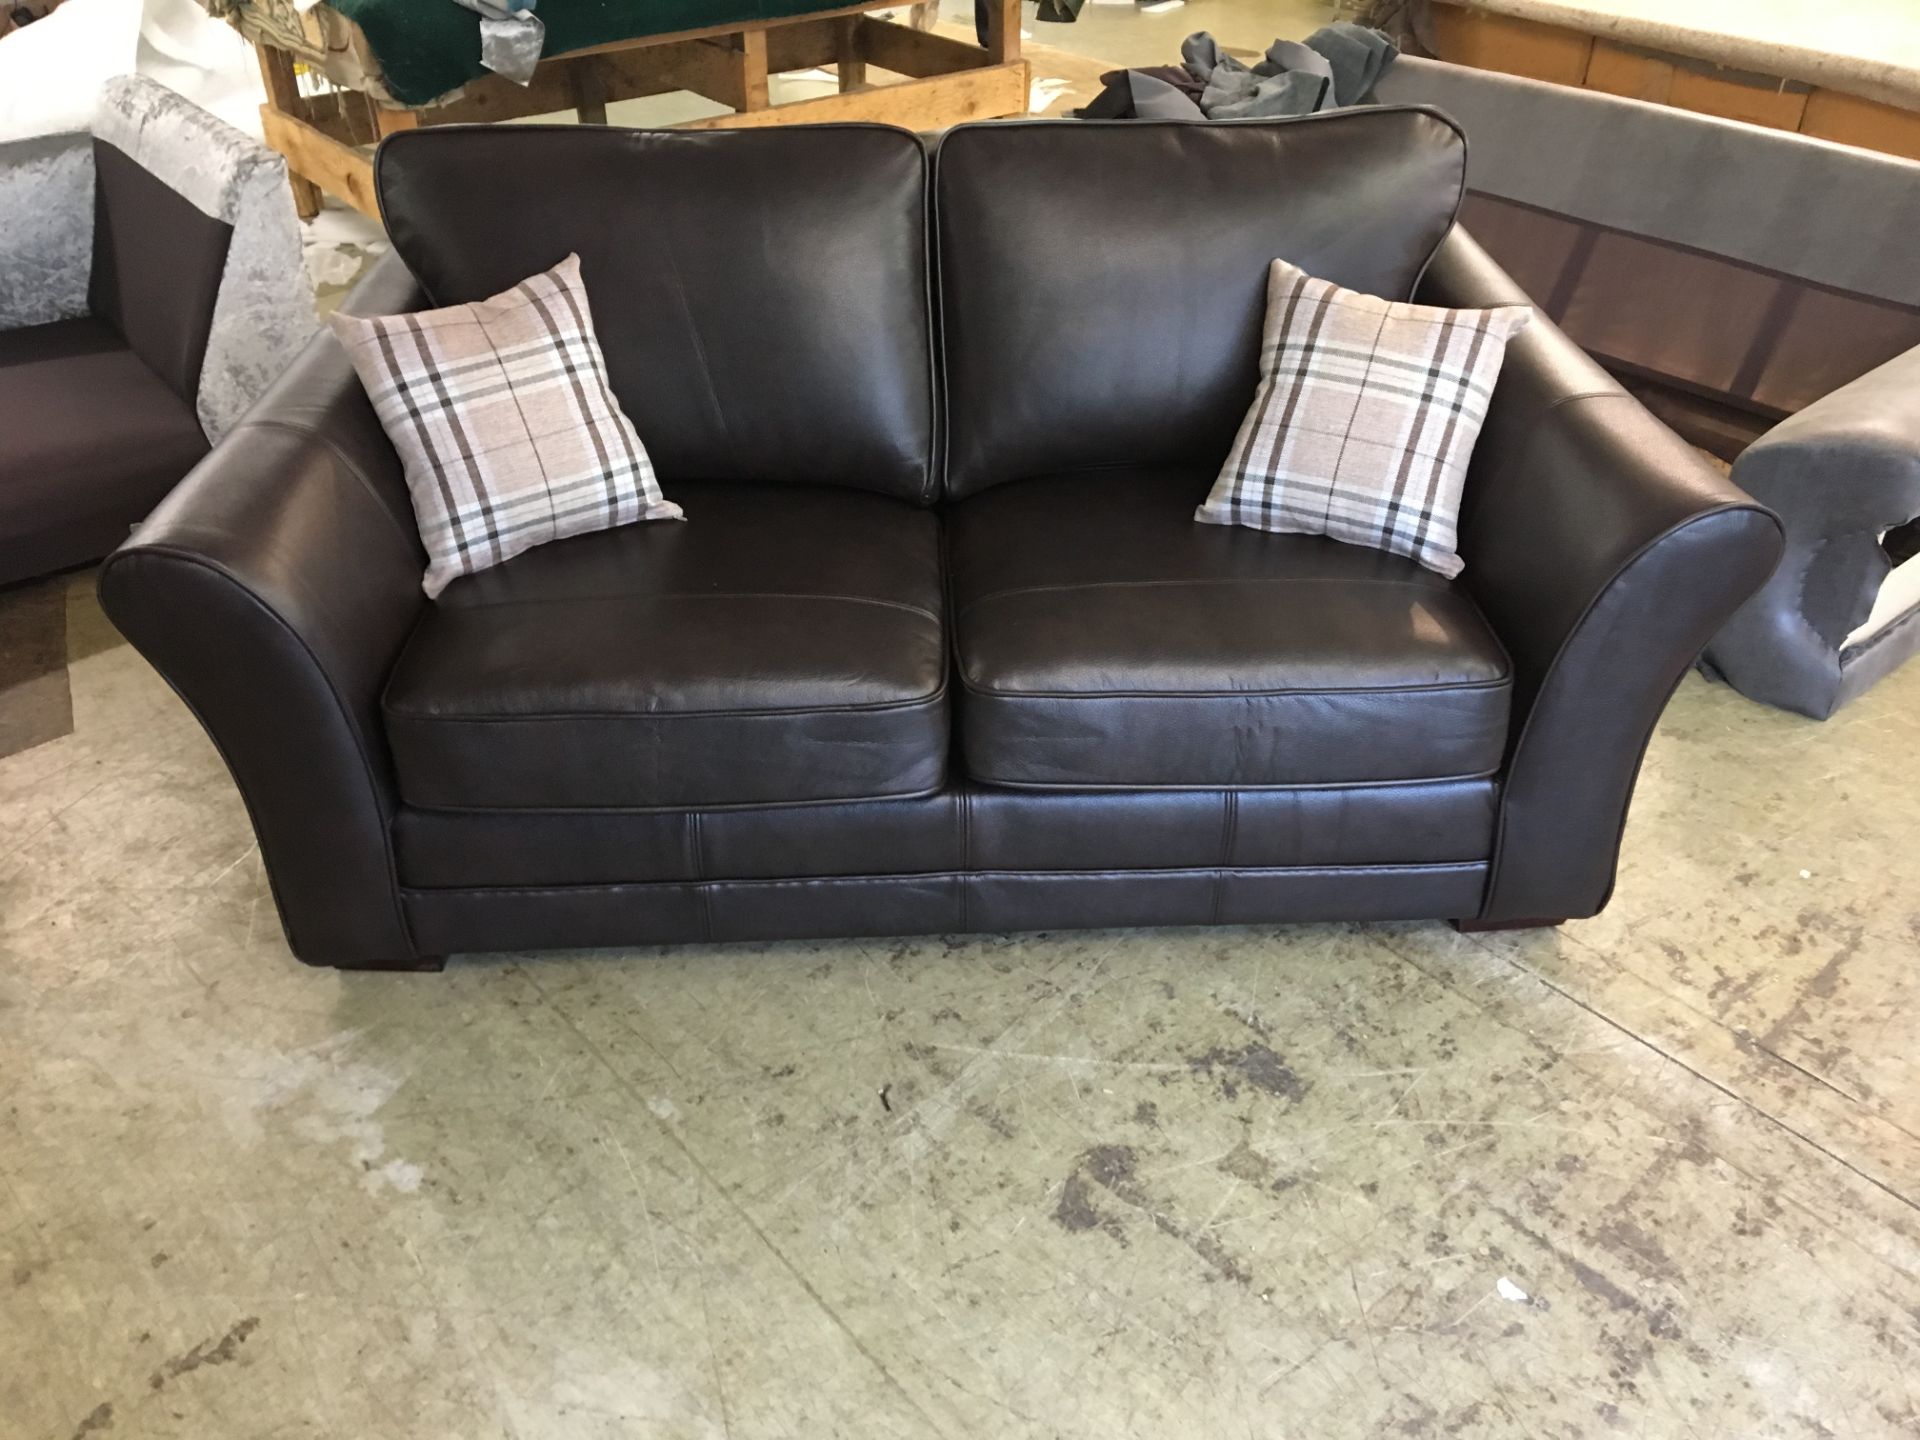 Ripley 3 seater sofa plus 2 seater sofa in rich brown leather plus matching footstool